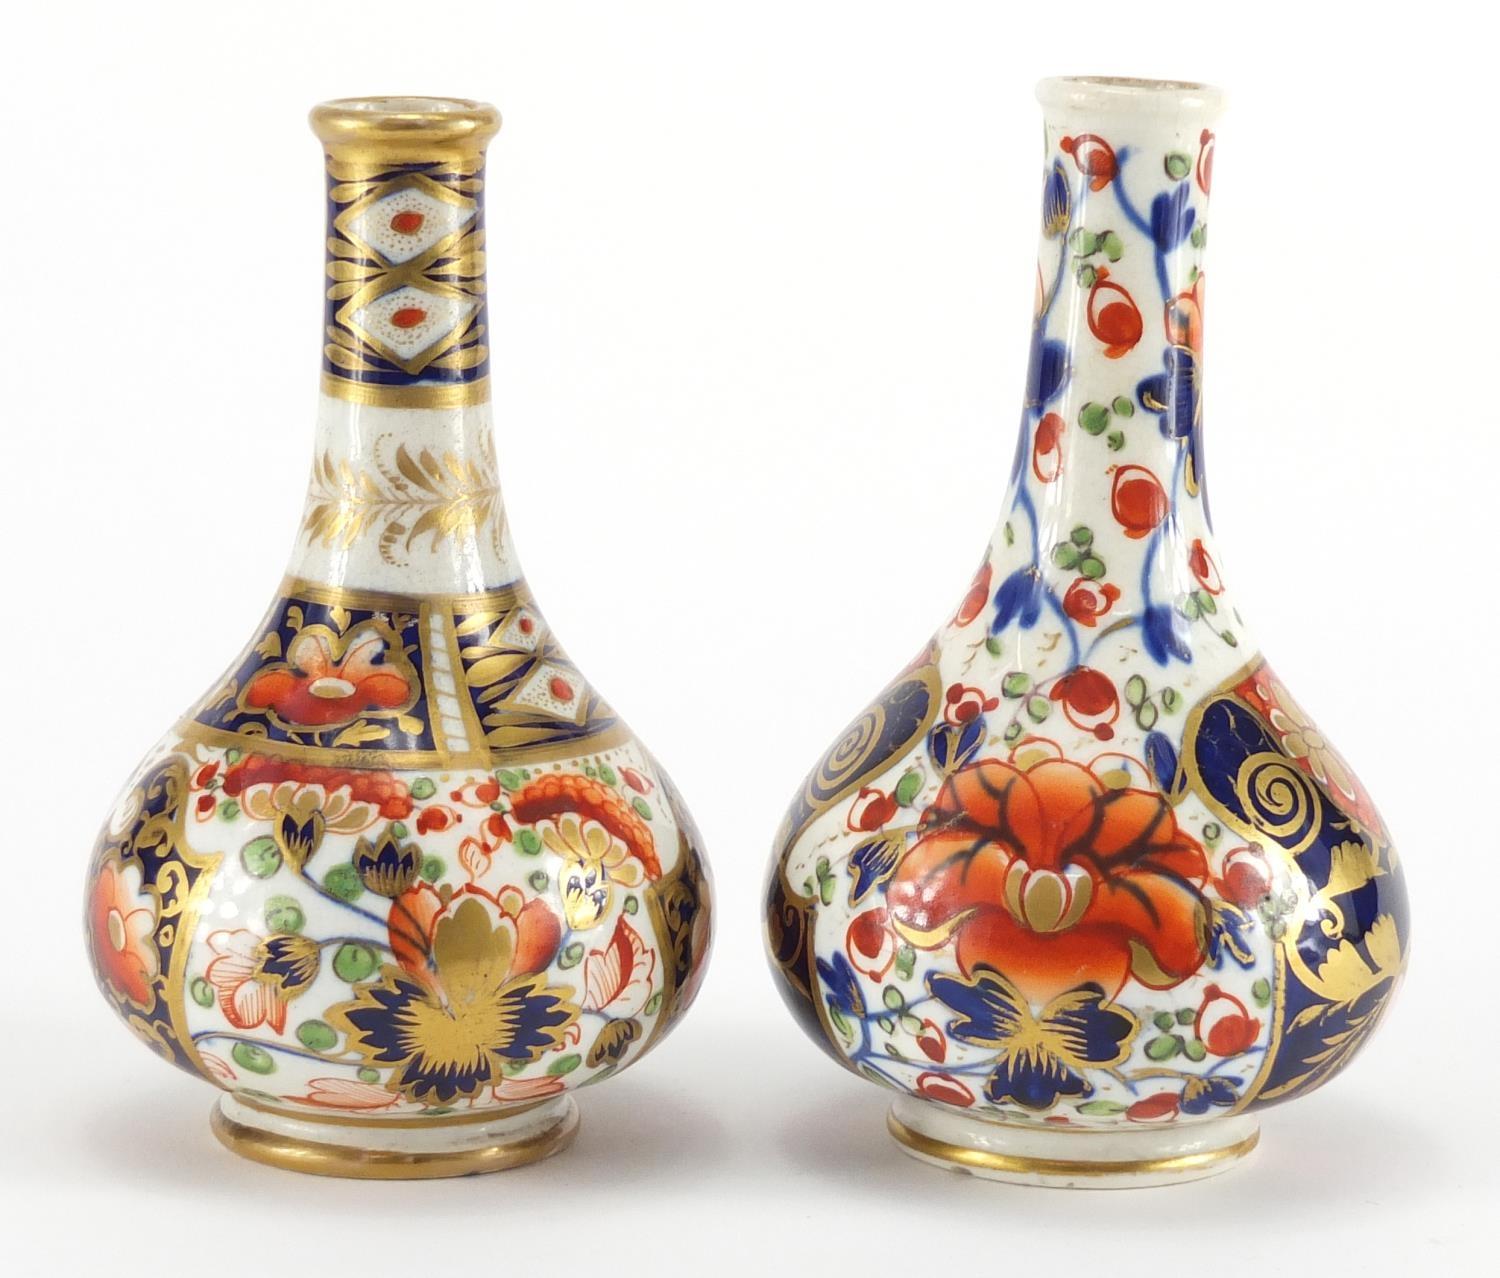 Two 19th century Derby porcelain bottle vases, hand painted and gilded in the Imari palette, painted